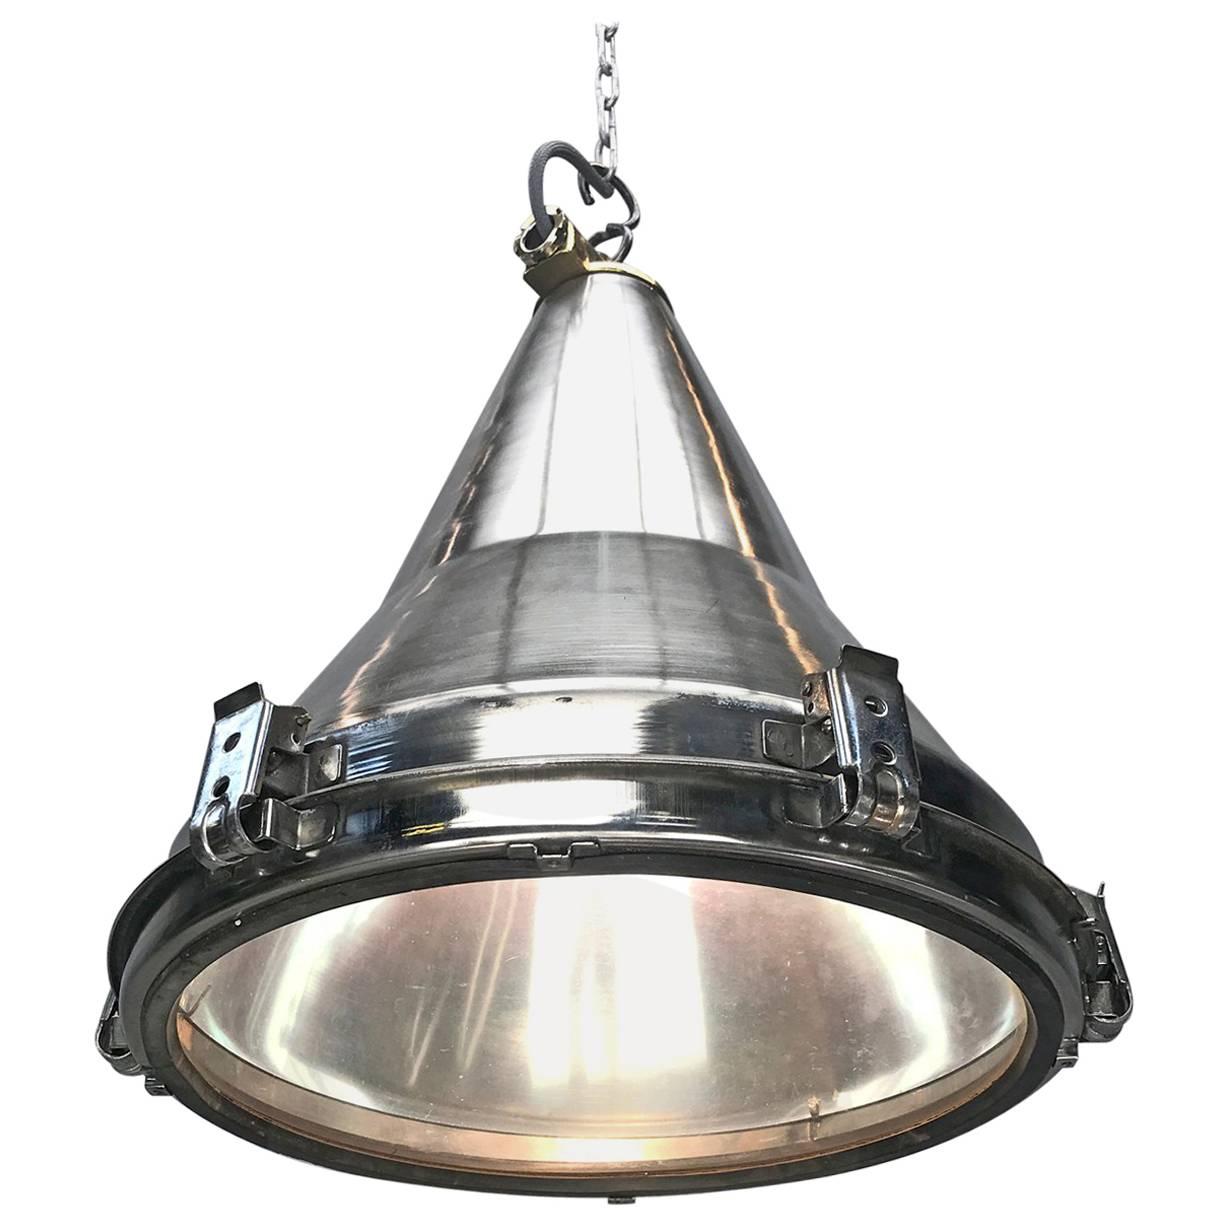 Late Century Korean Stainless Steel, Brass and Glass Conical Flood Light Pendant